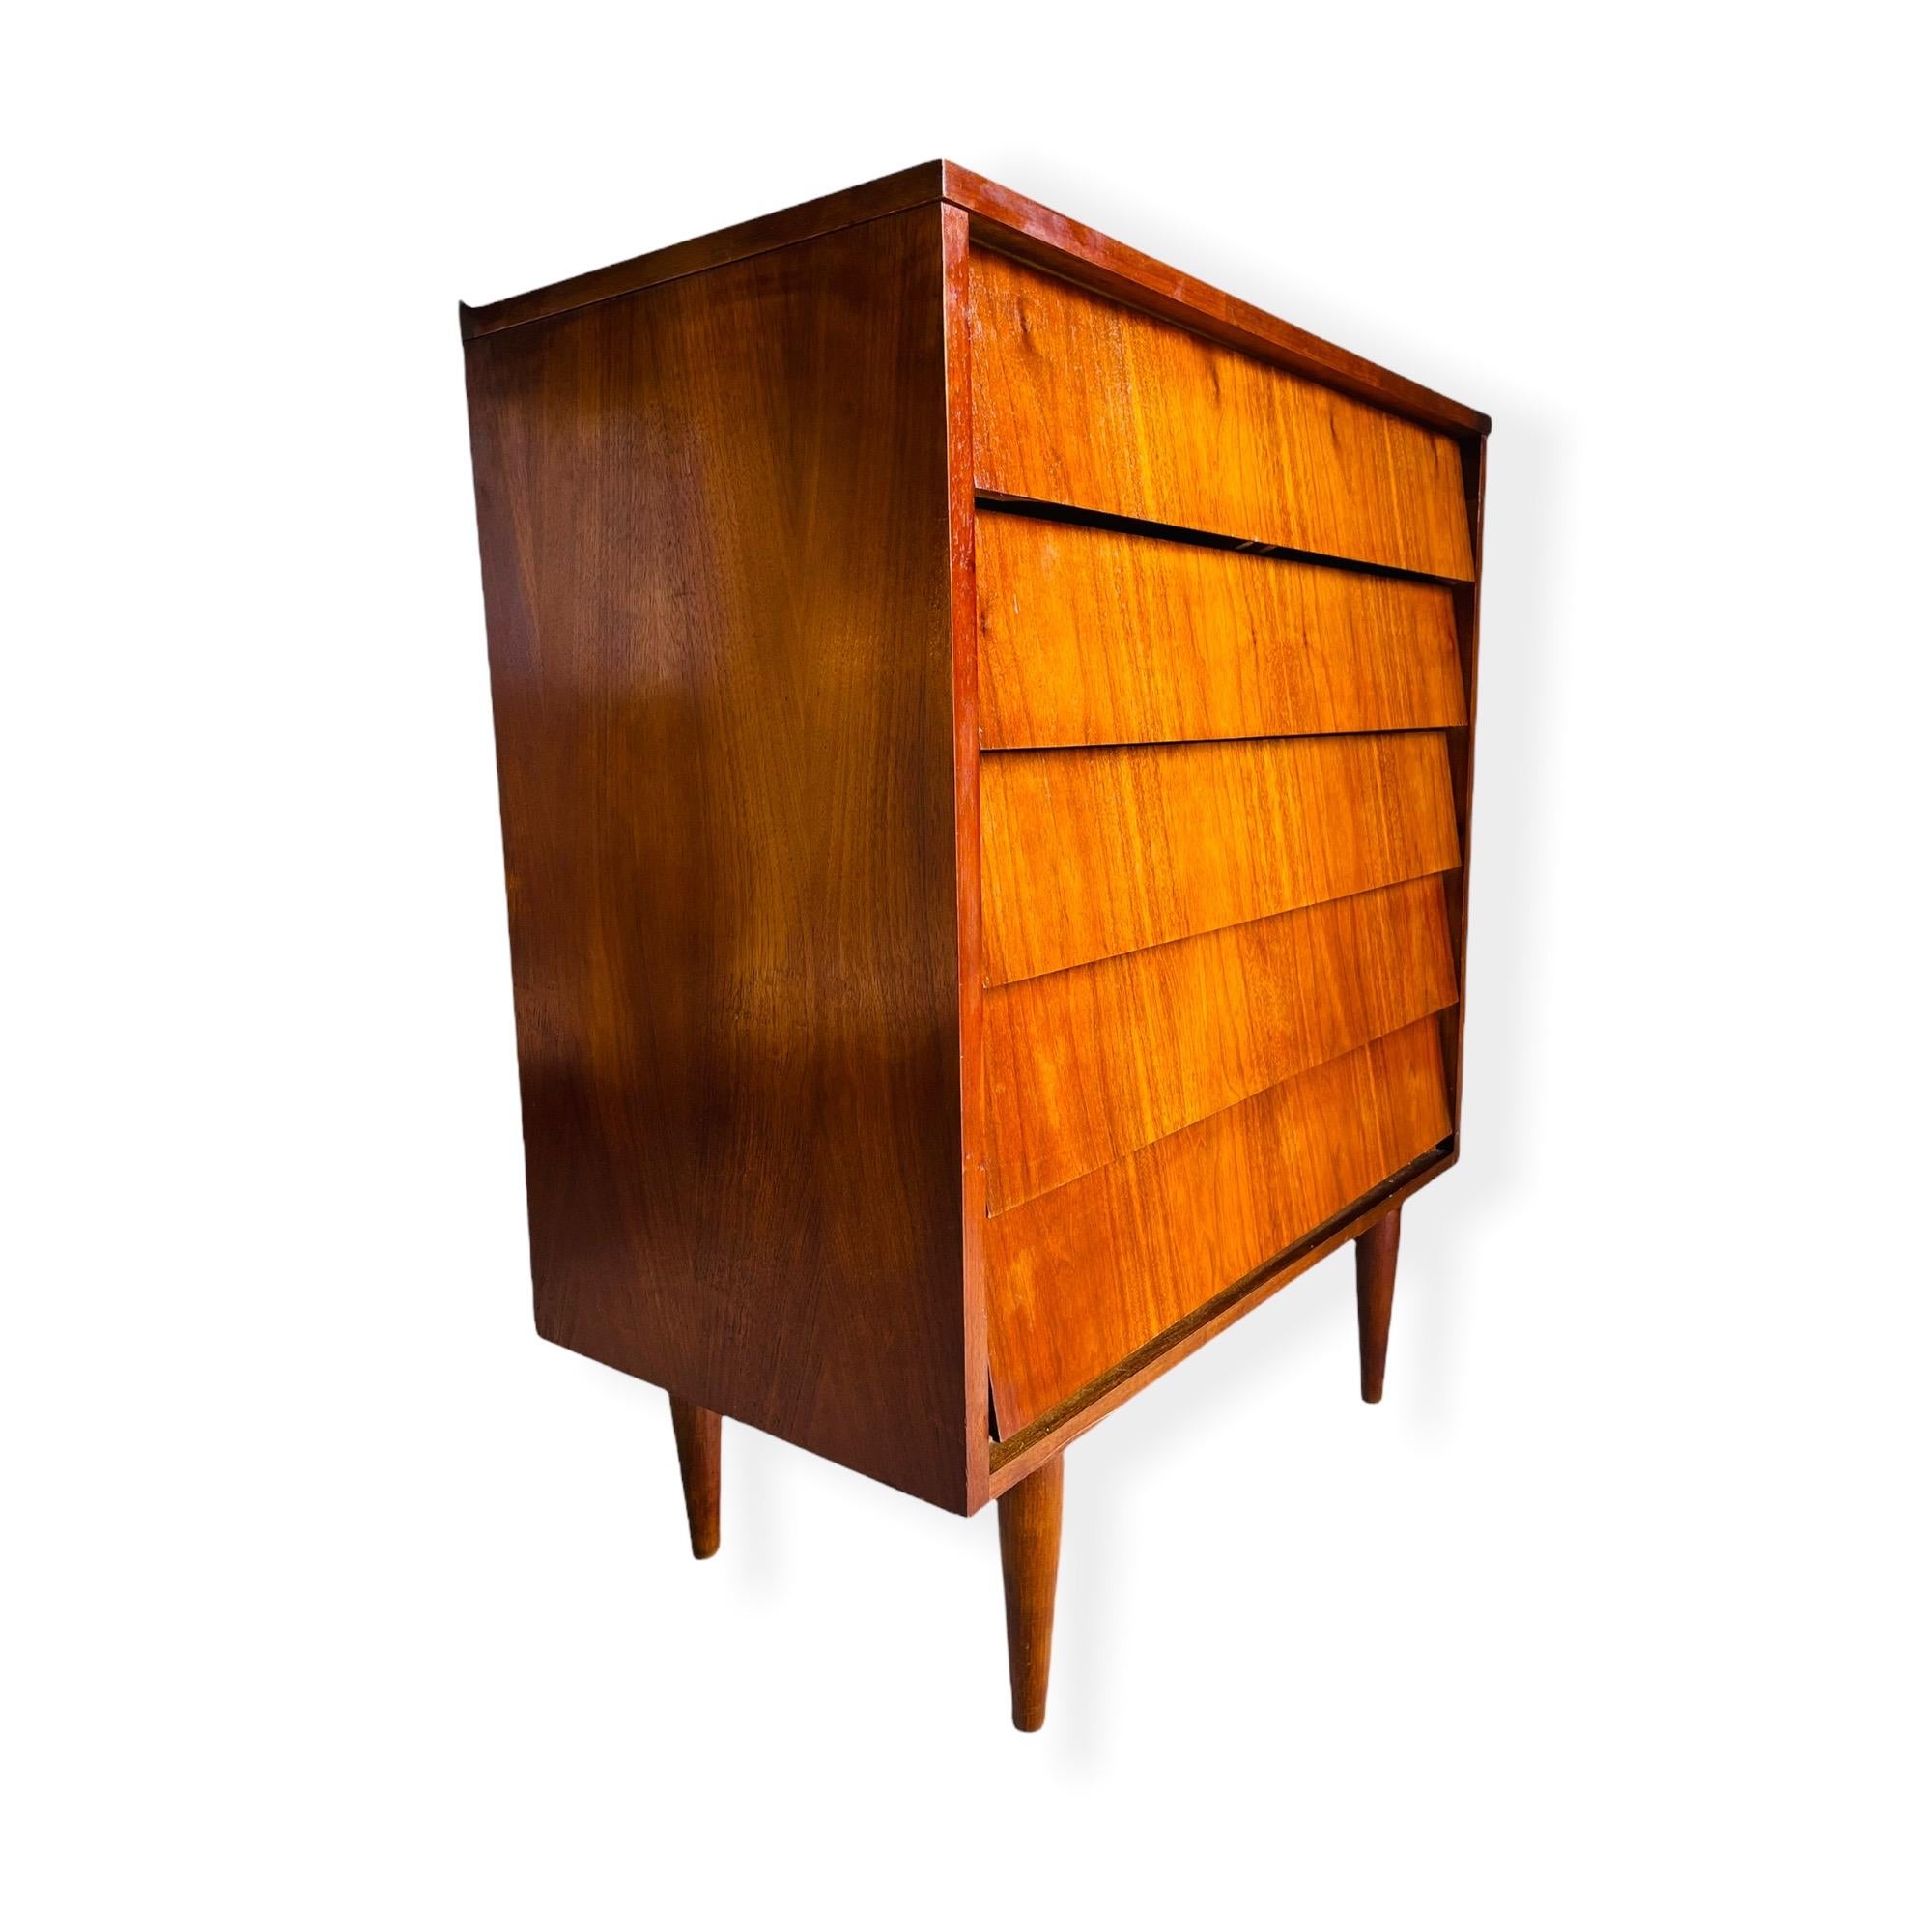 Here is a beautiful Mid-Century Modern tall/highboy dresser in Walnut with 5 drawers. This dresser is in good vintage condition with normal wear consistent with age and use. 

Measures: W 34” x D 18 x H 41”.